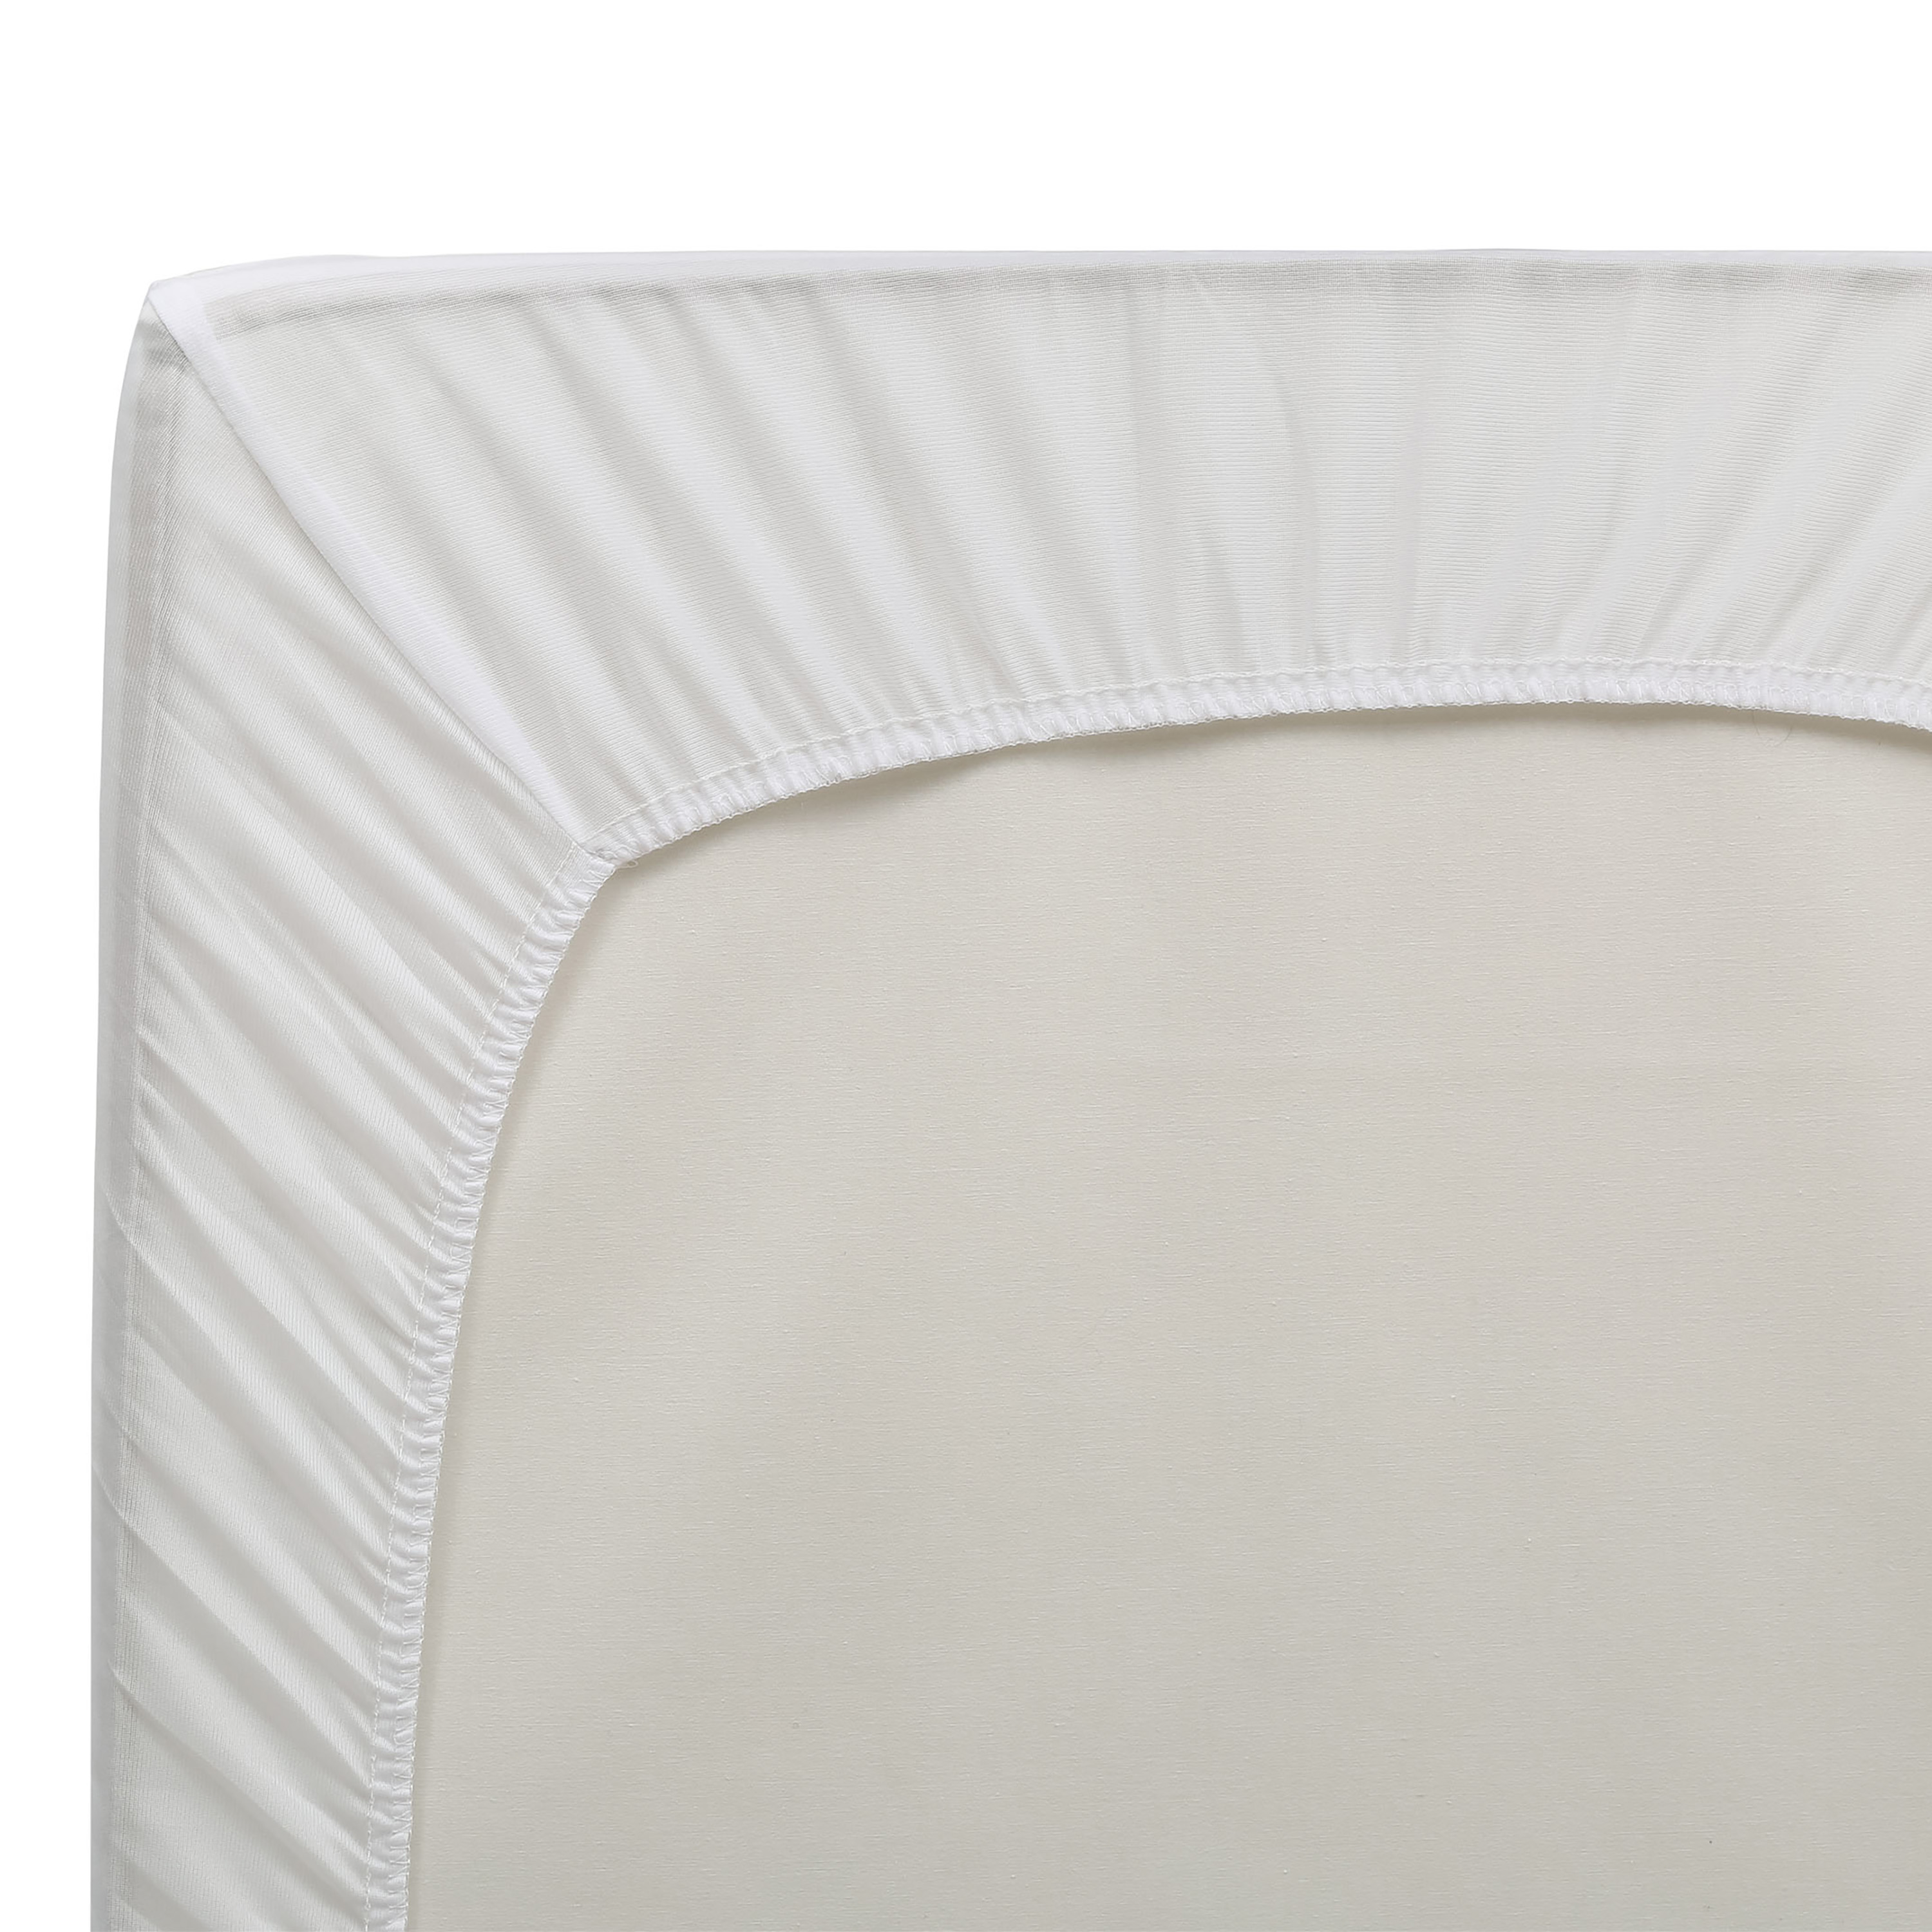 ComforPedic from Beautyrest KIDS Fitted Crib Mattress Protector - image 2 of 4